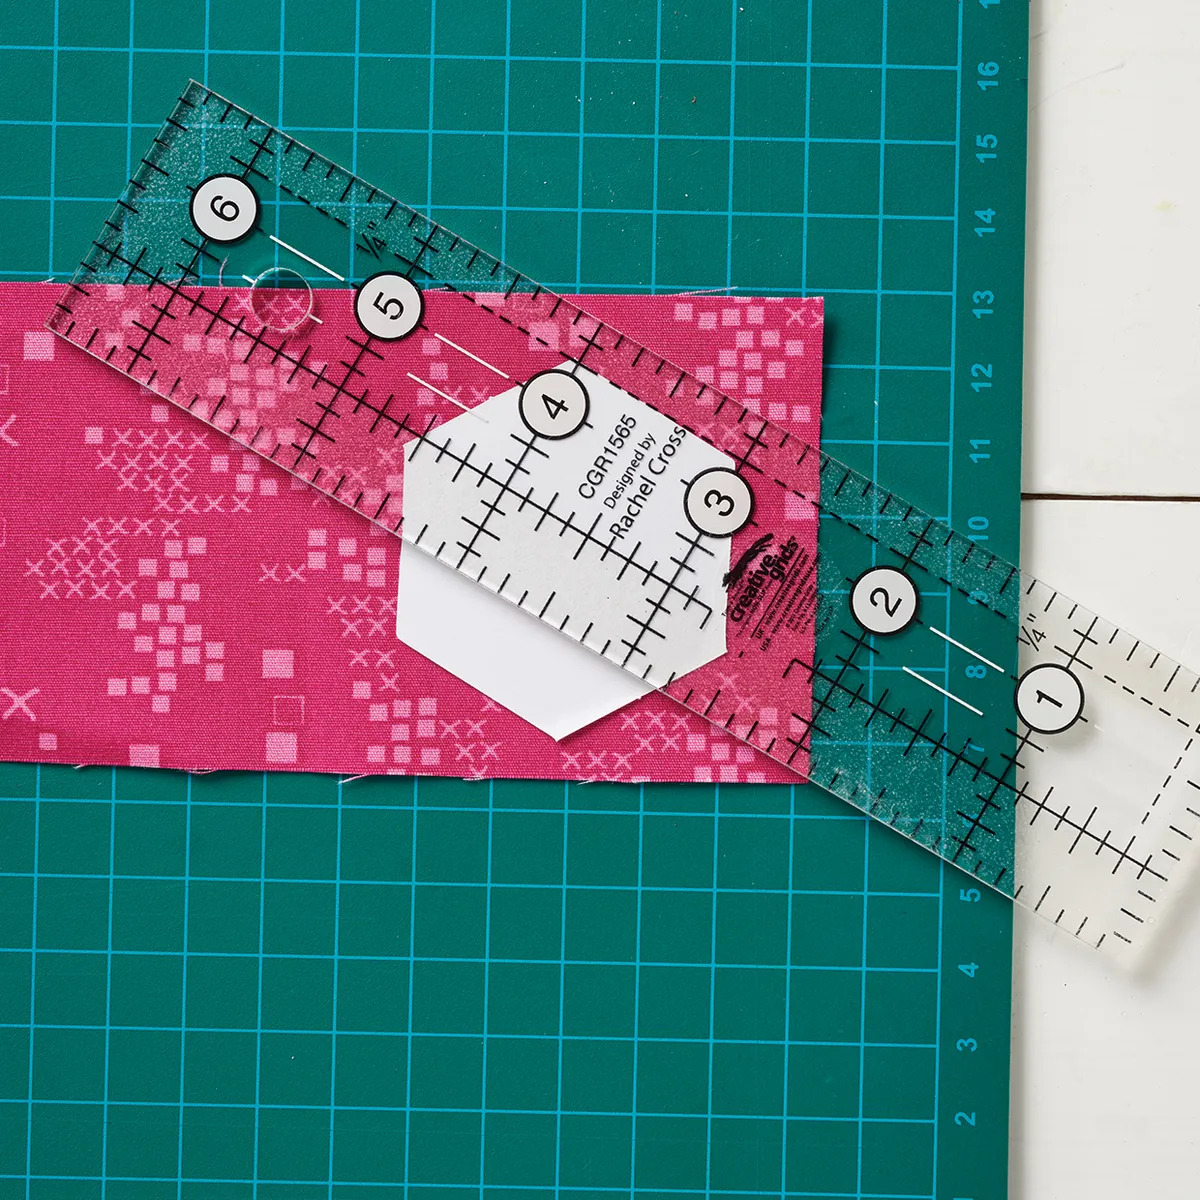 Cut quilt pieces accurately with Guidelines Non-Slip Quilt Ruler